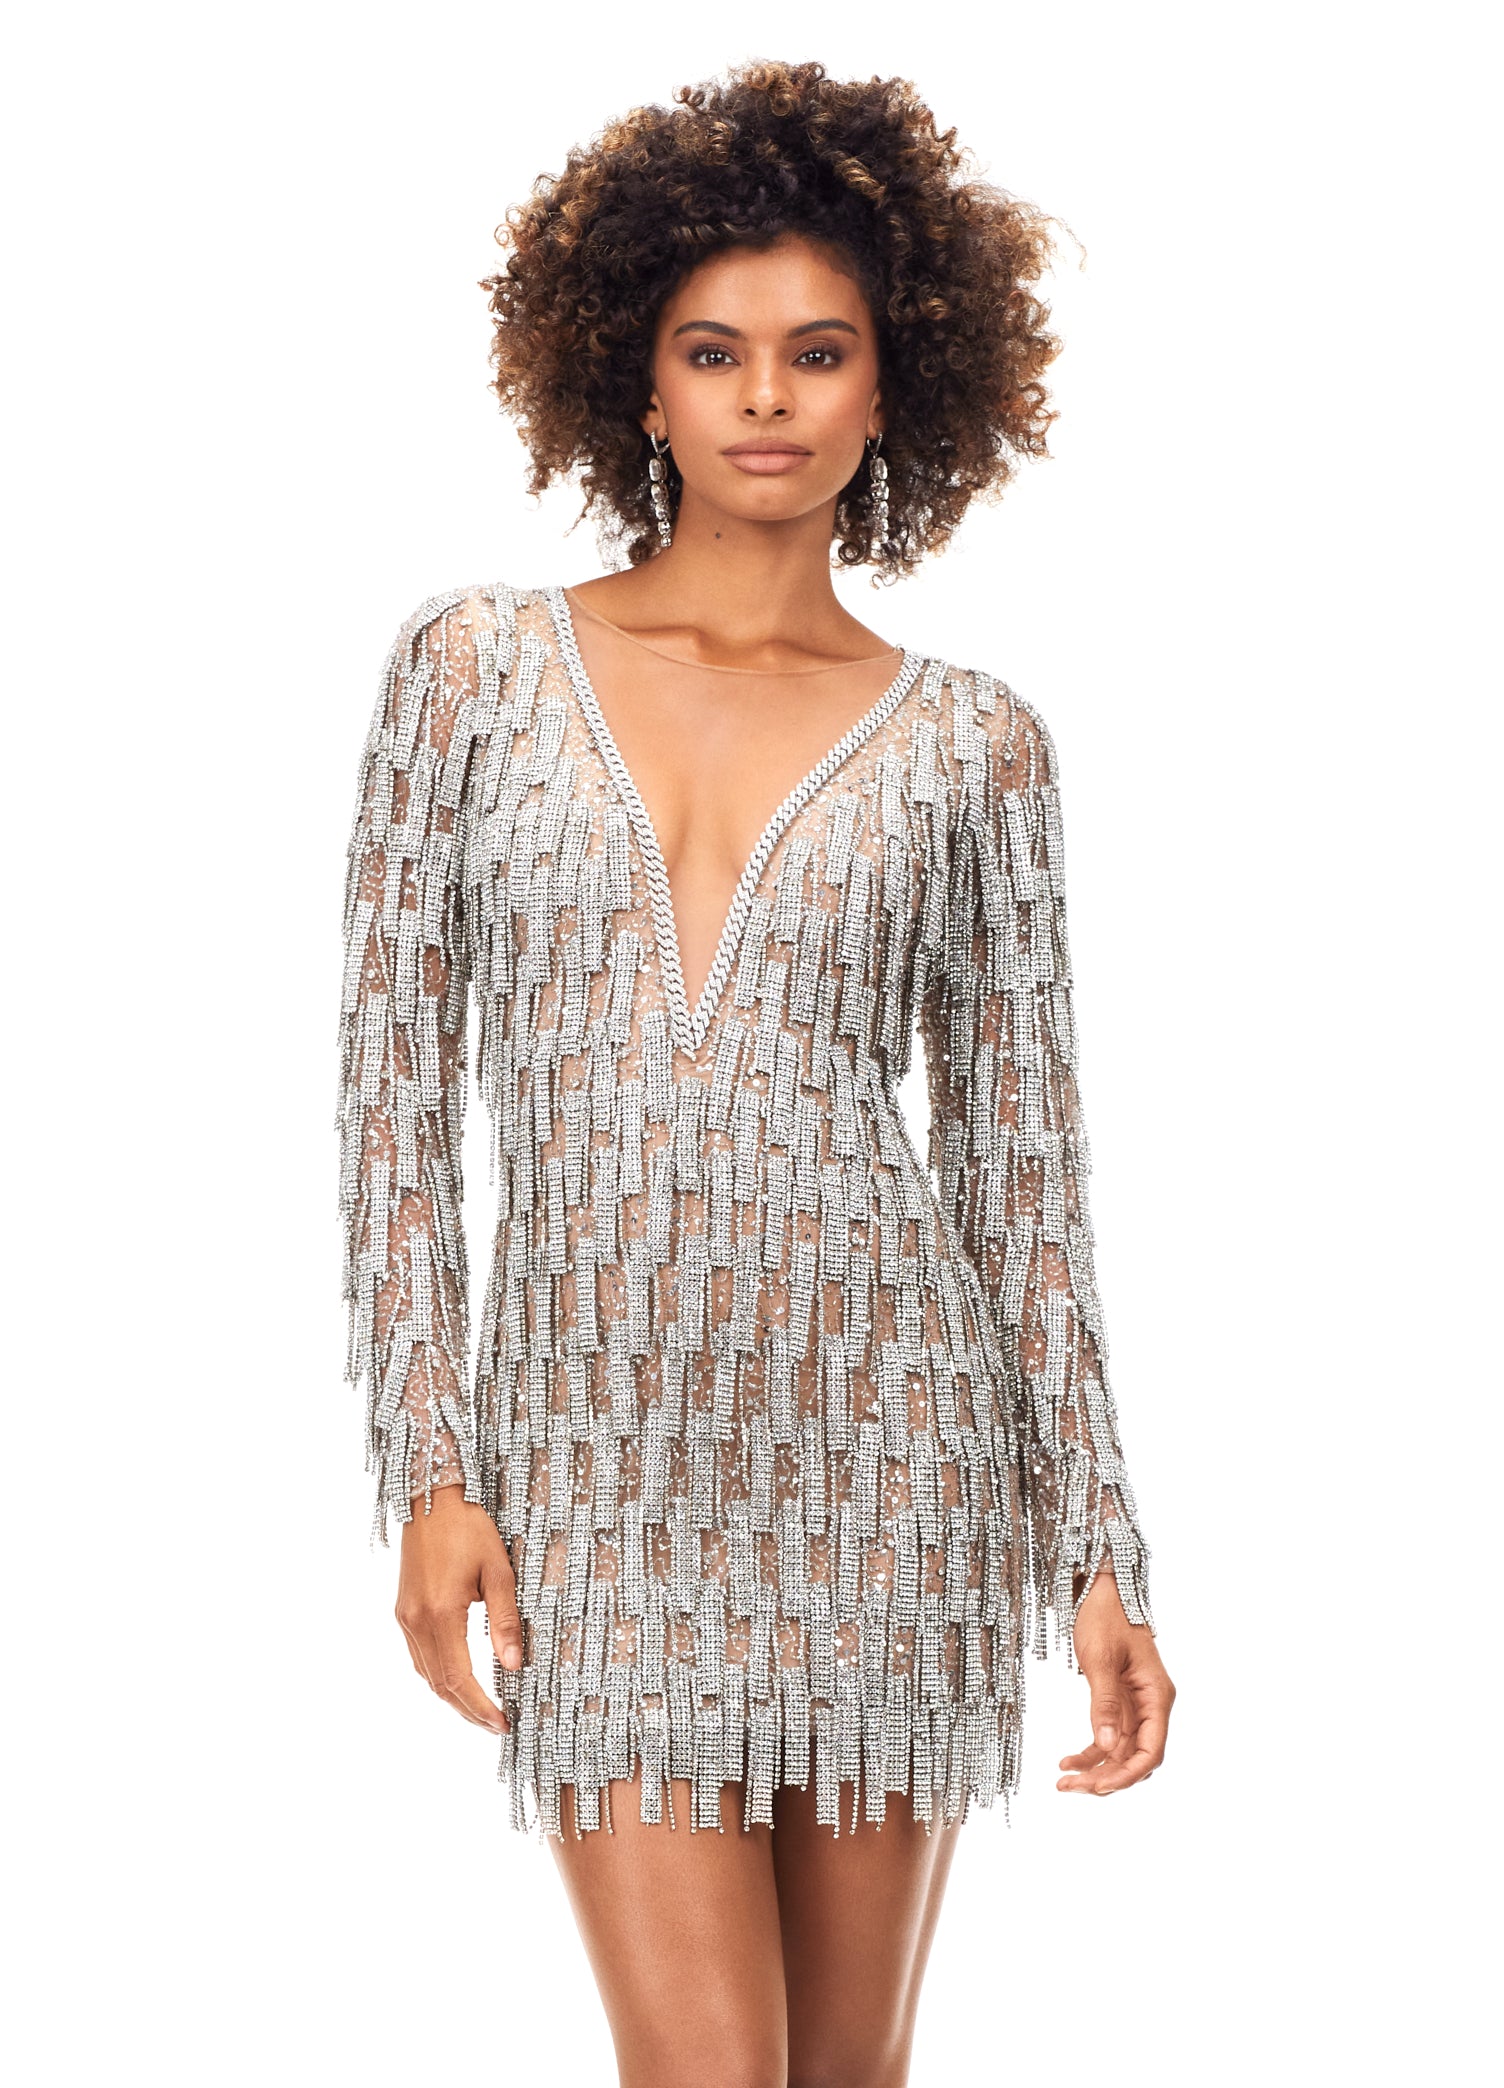 This sophisticated Ashley Lauren 4569 Beaded Cocktail Dress with Fringe and Fur Neckline is sure to turn heads. Its intricate beaded detailing, stylish fringe and luxurious fur neckline create a timeless look perfect for any special occasion.